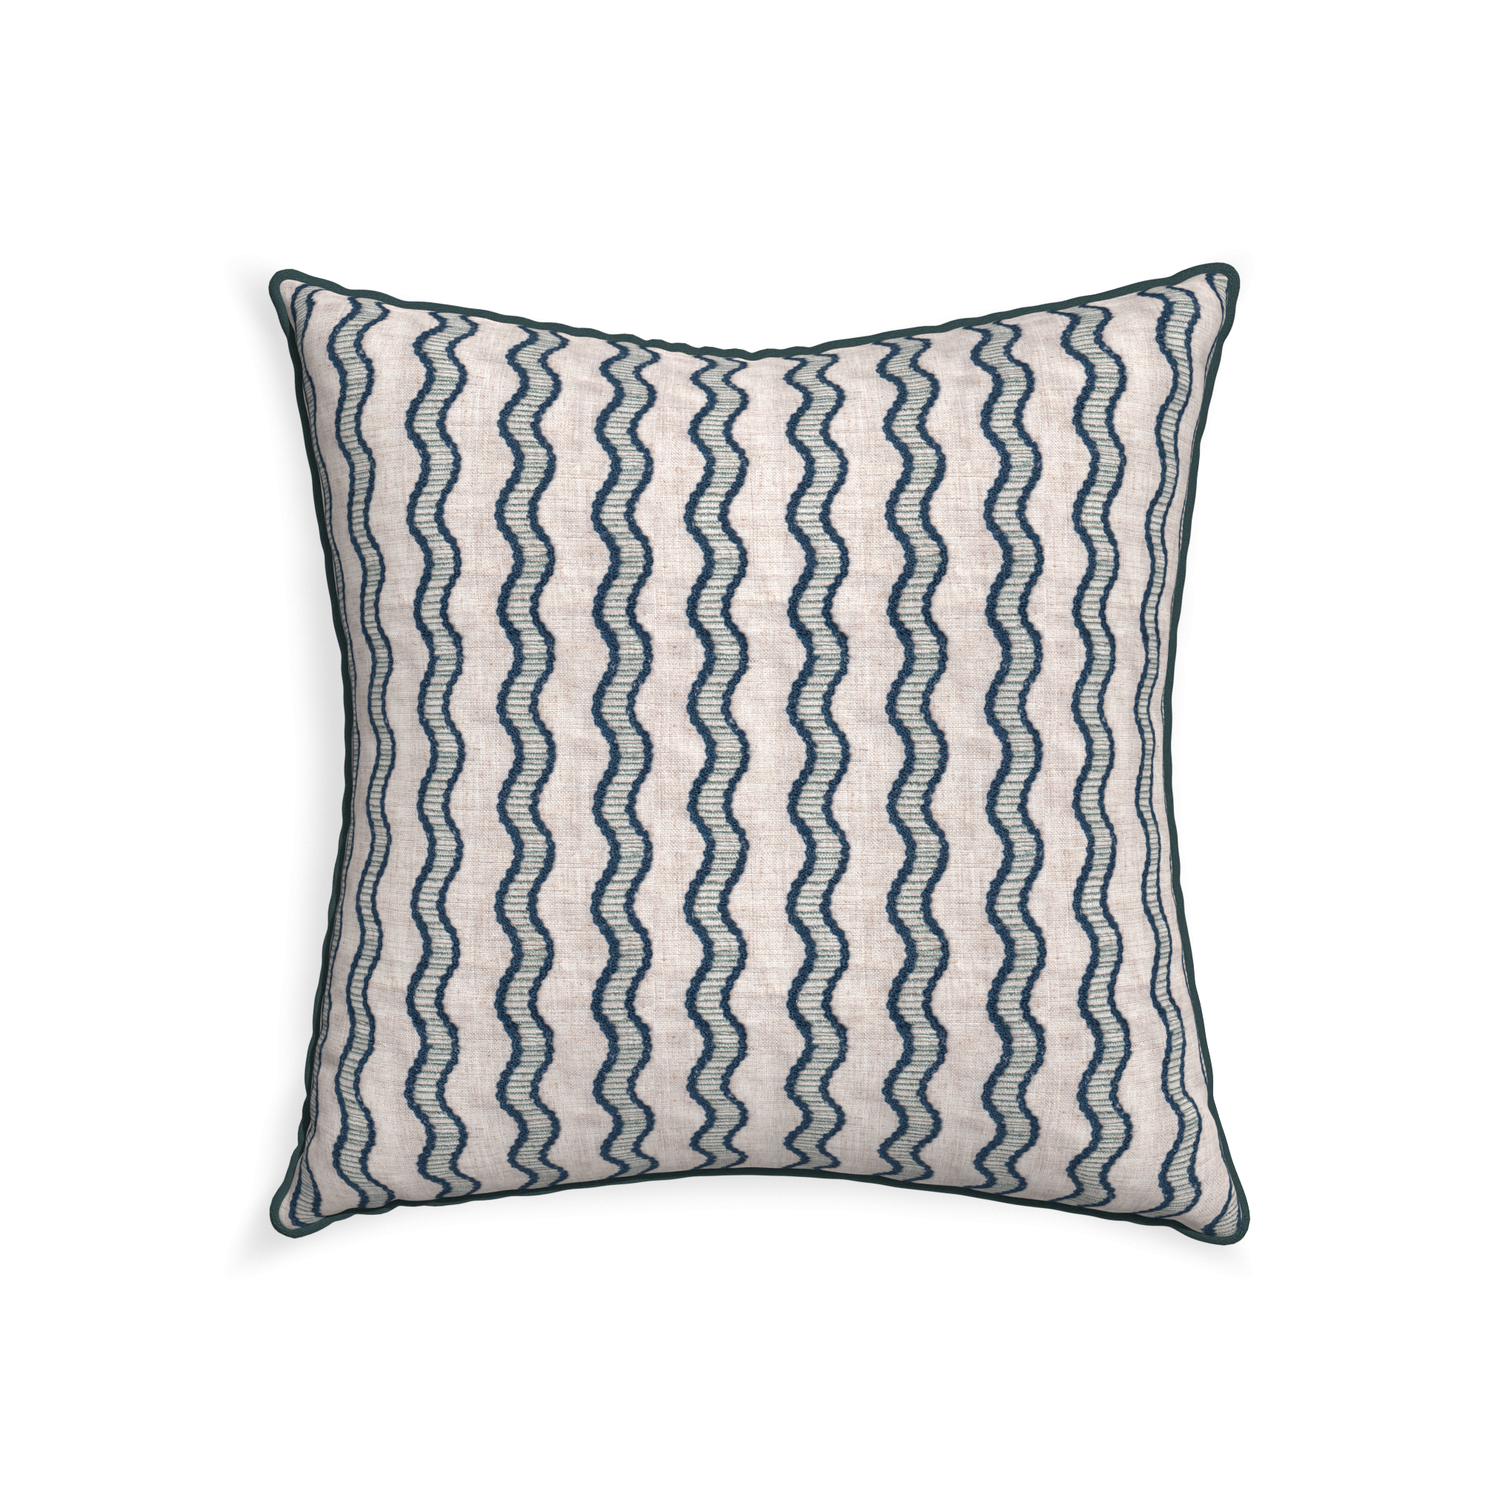 22-square beatrice custom embroidered wavepillow with p piping on white background